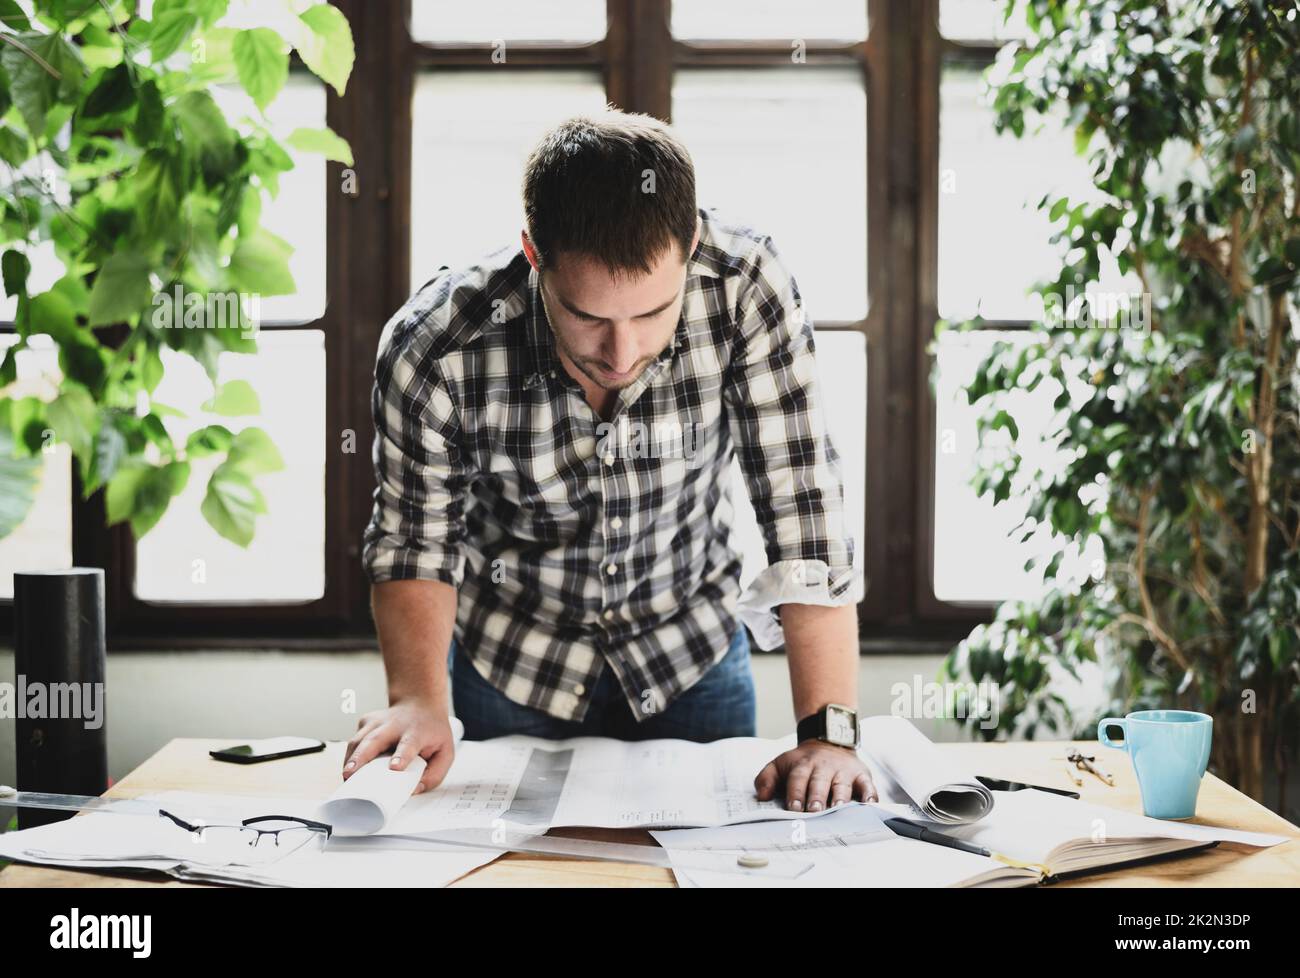 Man working on architectural project Stock Photo